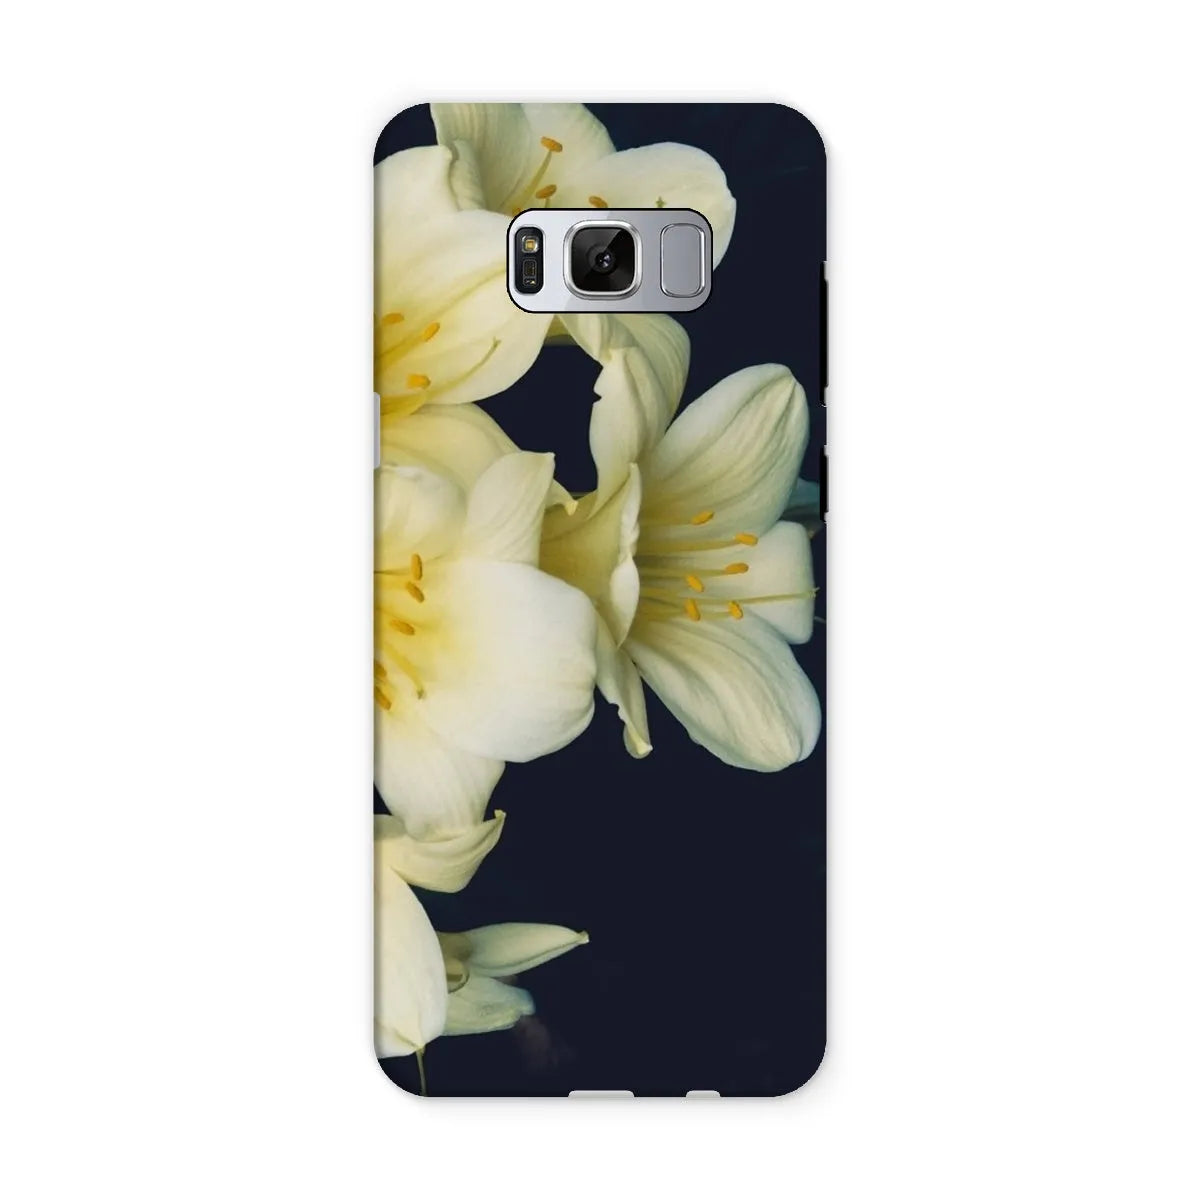 Flower Power Too Tough Phone Case - Samsung Galaxy S8 / Matte - Mobile Phone Cases - Aesthetic Art